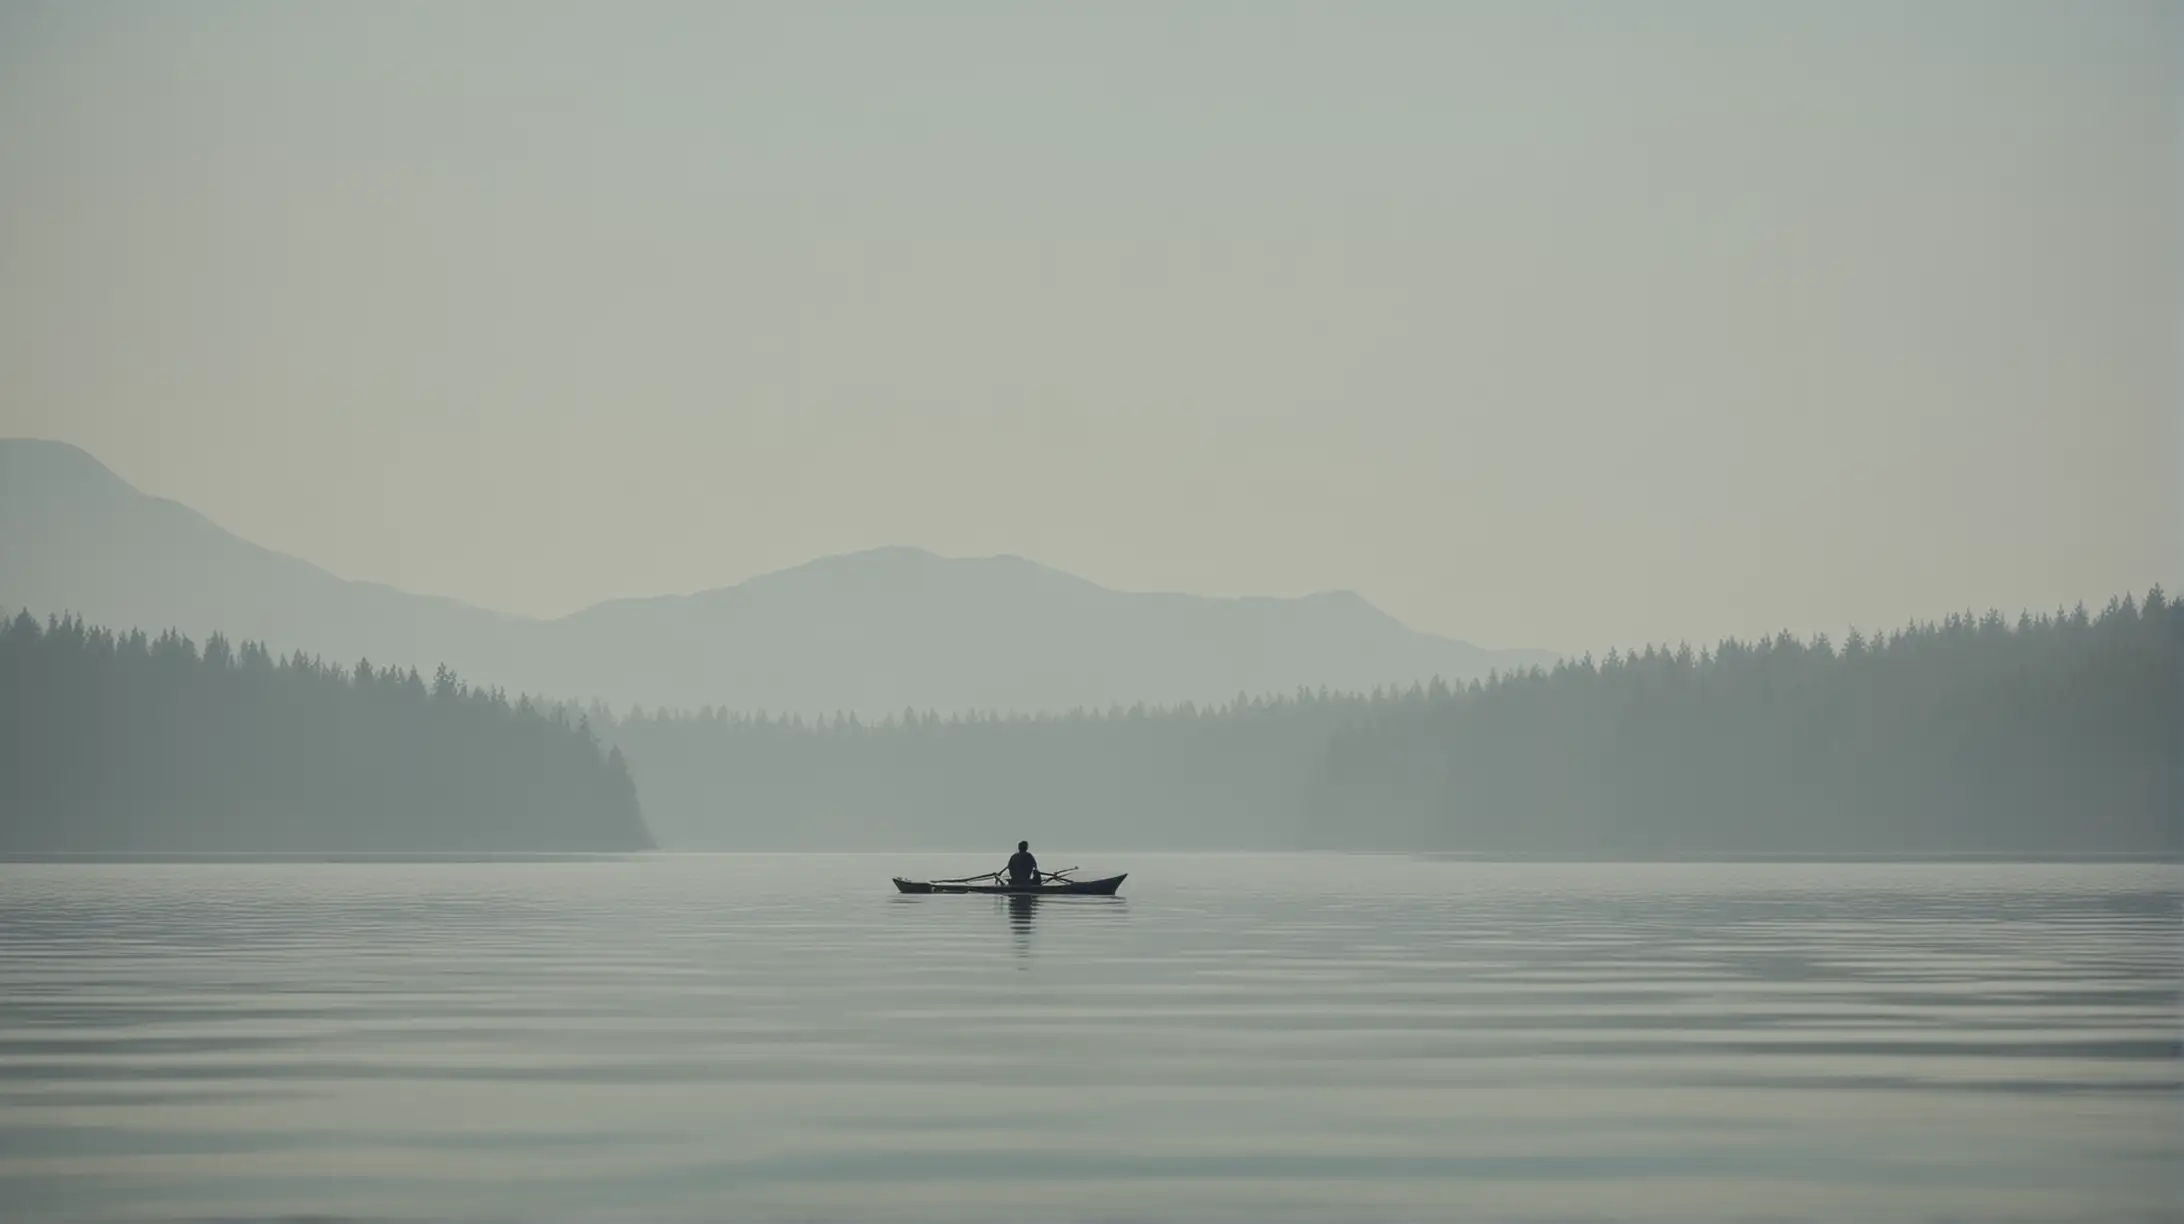 Lone Sailor on Serene Lake with Calm Waters